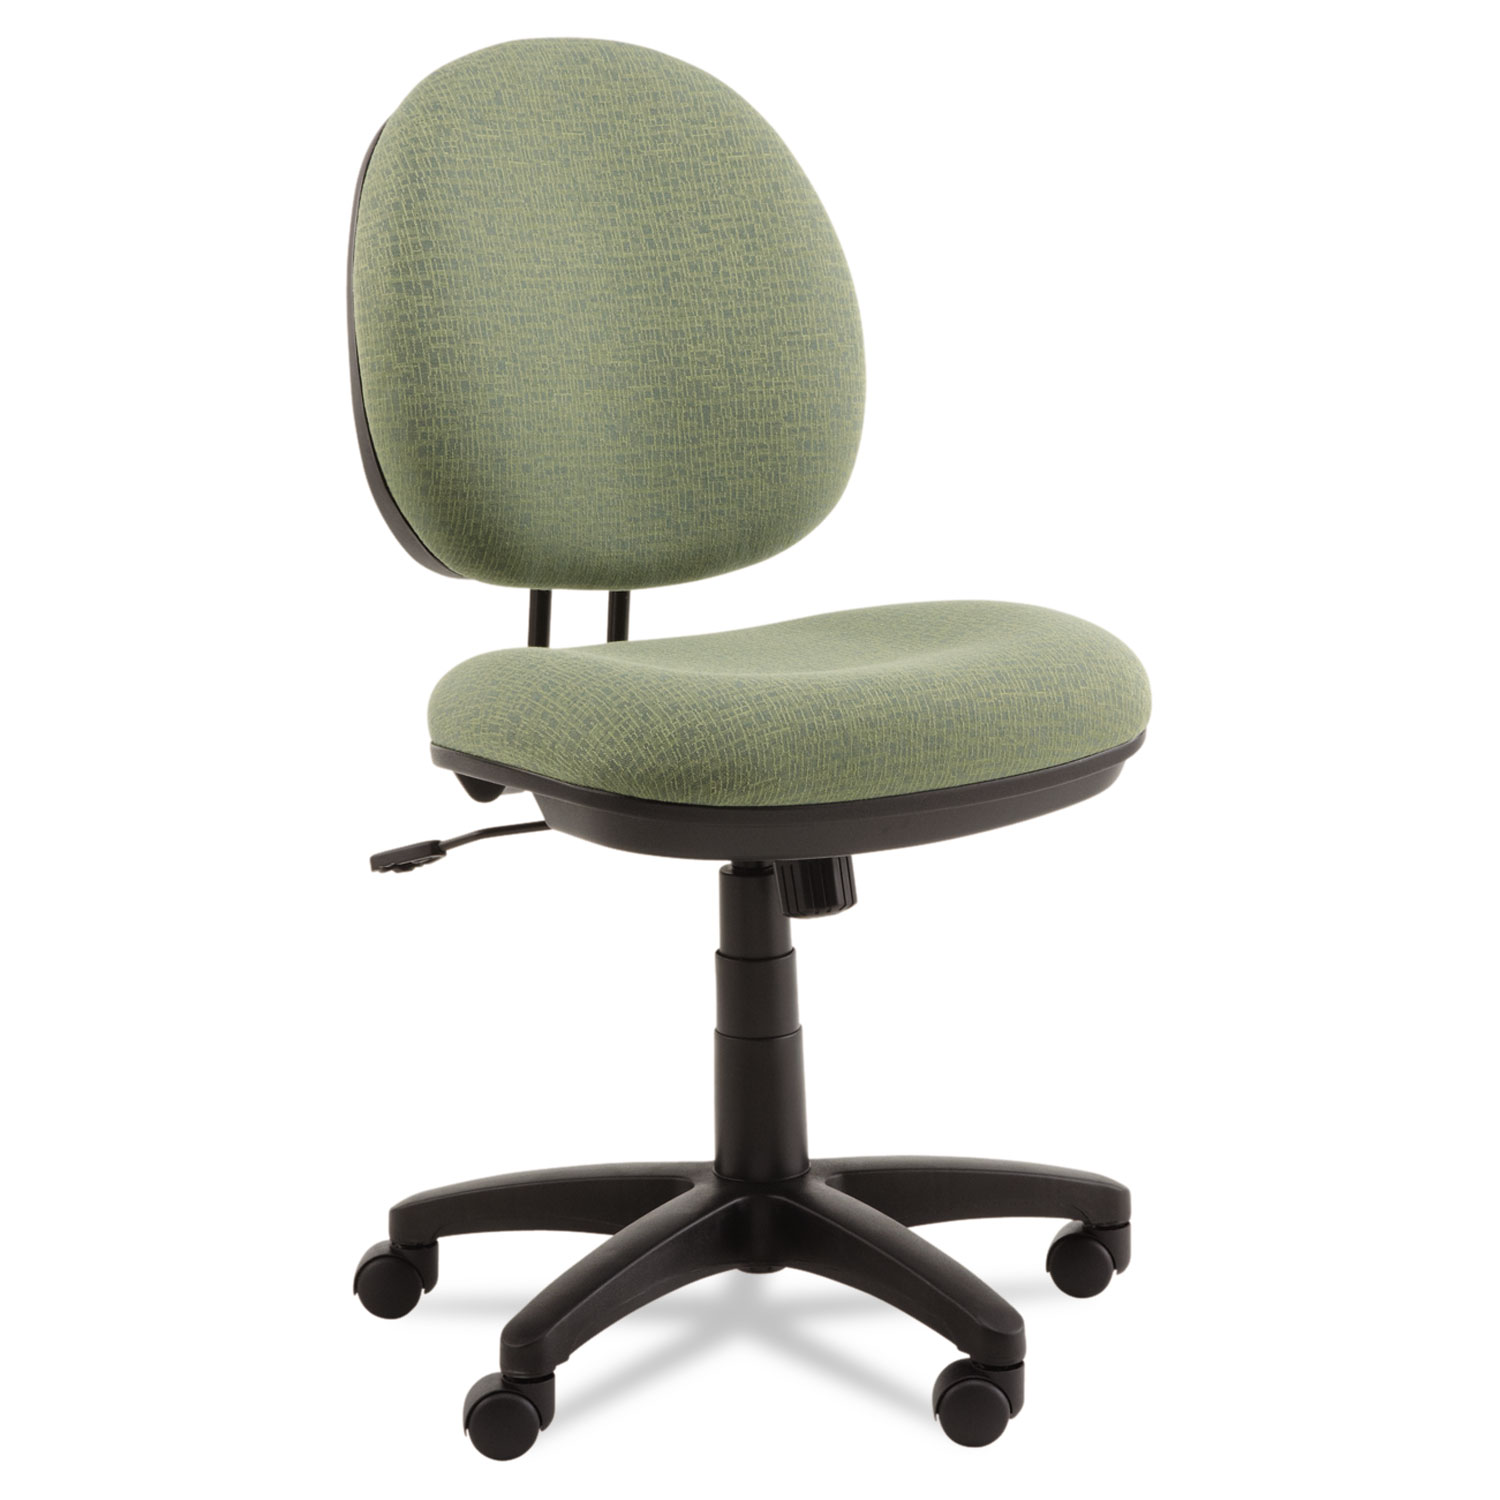  Alera ALEIN4871 Alera Interval Series Swivel/Tilt Task Chair, Supports up to 275 lbs., Parrot Green Seat/Parrot Green Back, Black Base (ALEIN4871) 